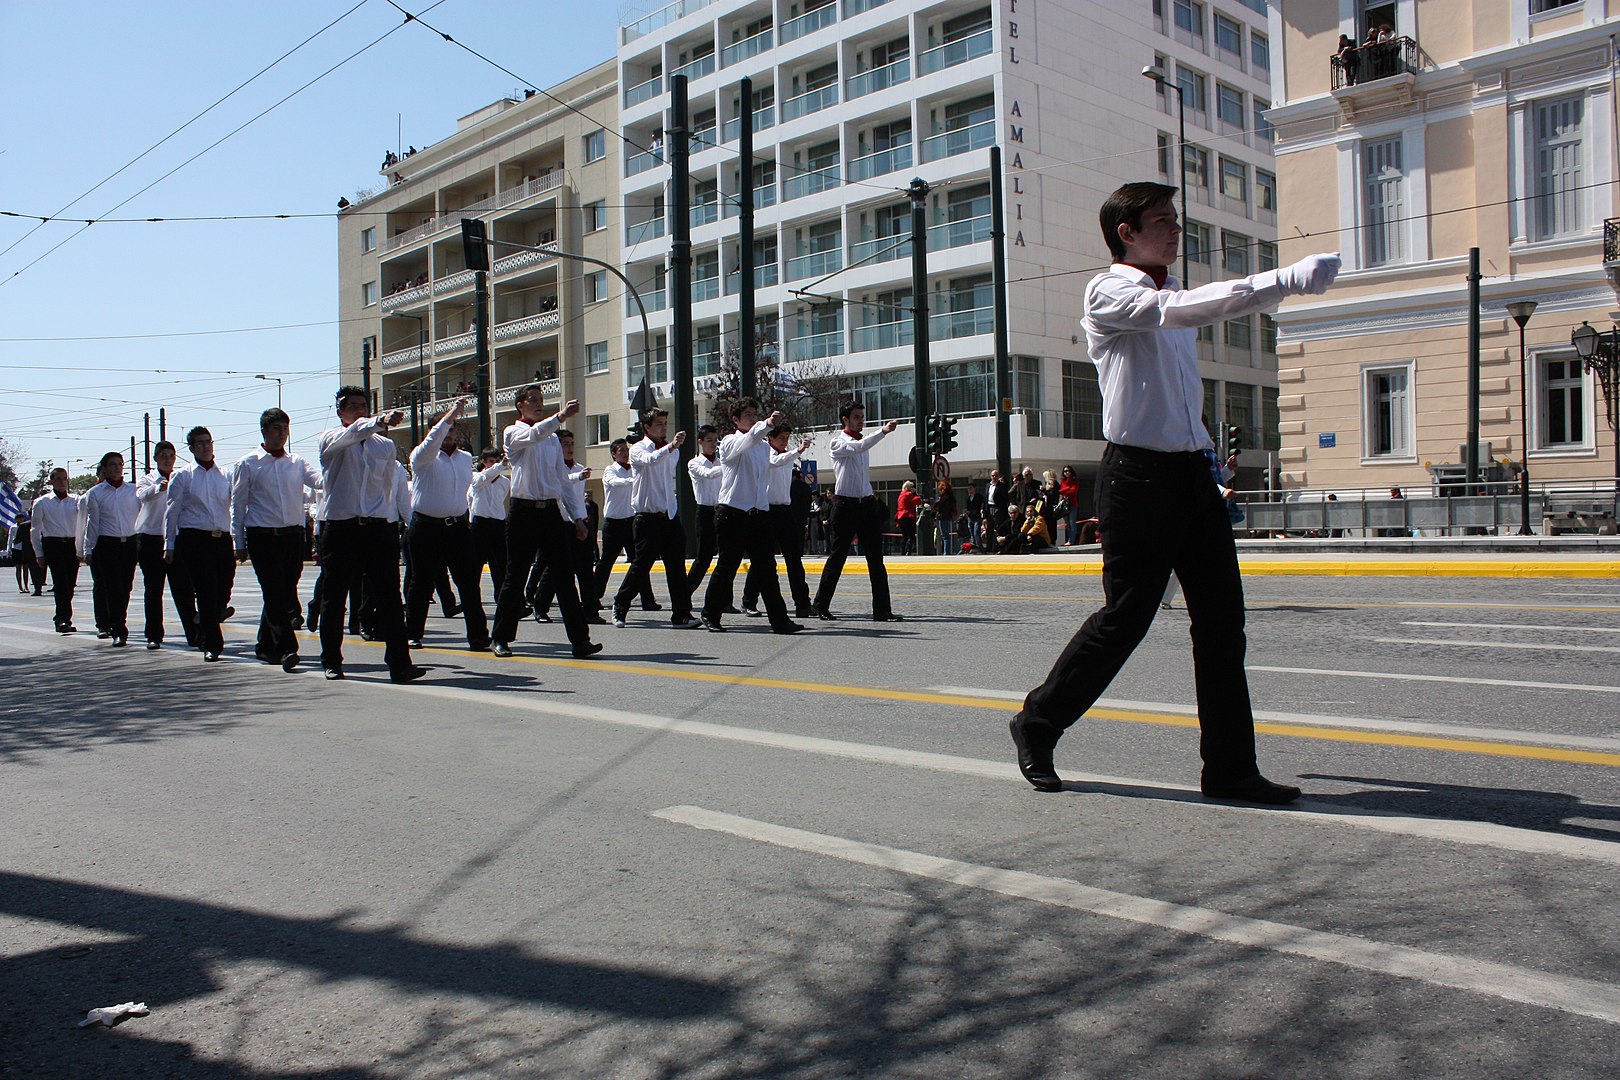 1620px-Pupil_parade_in_Athens_Greece wikipedia.jpg